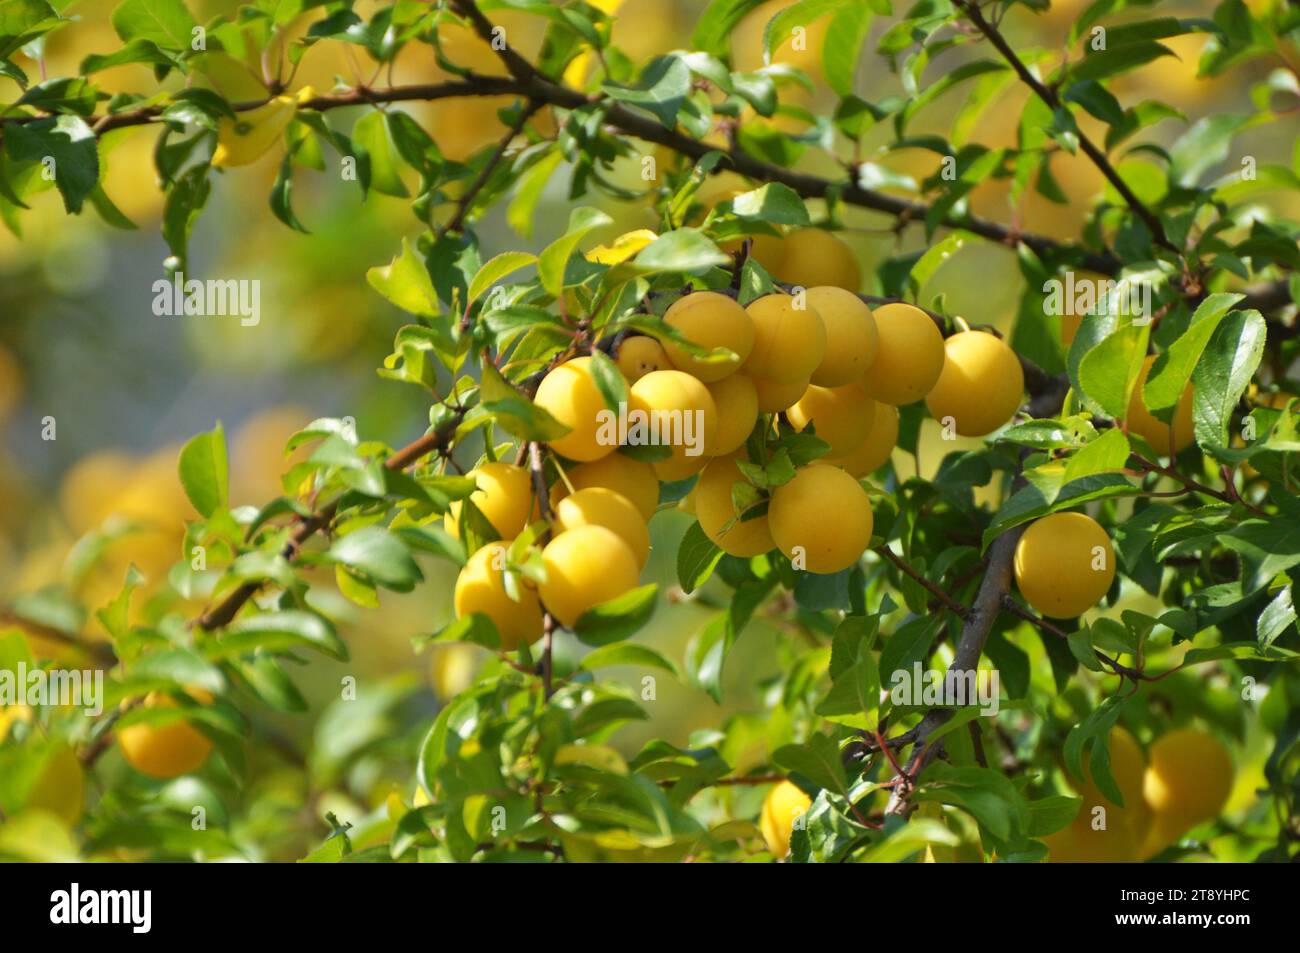 On the branches of the tree ripen fruits of plums (Prunus cerasifera). Stock Photo